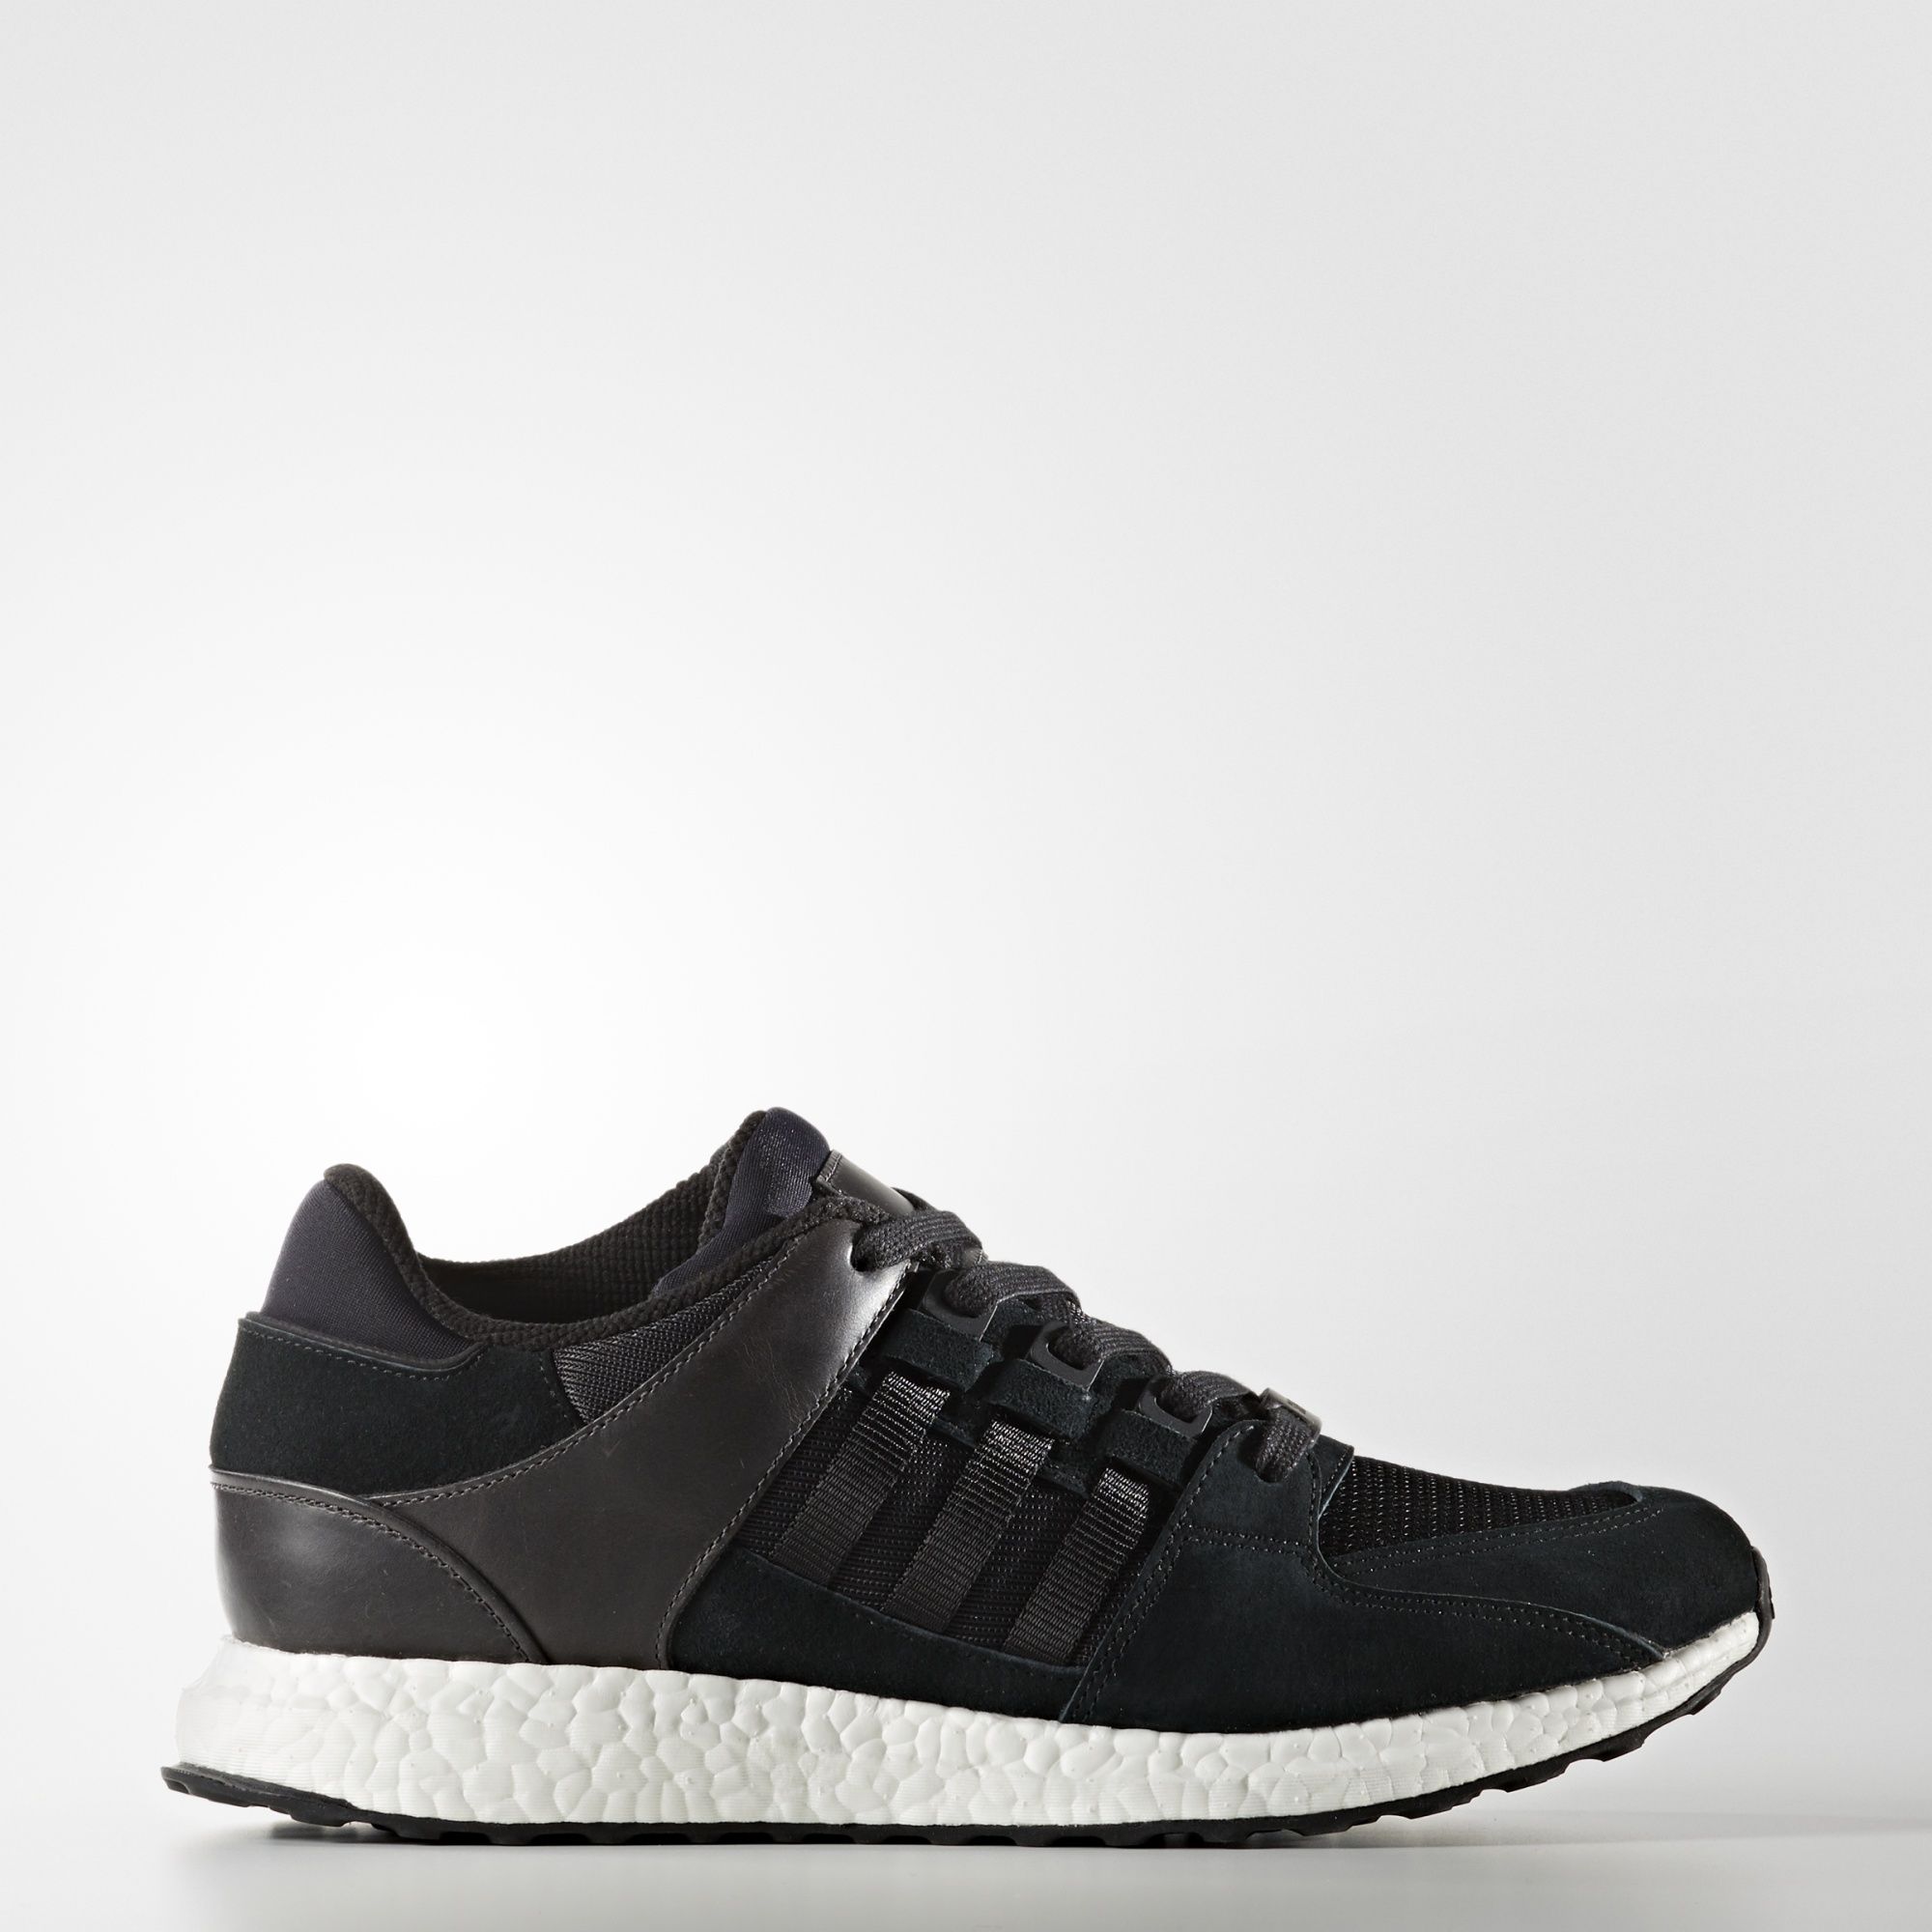 Adidas EQT Support Ultra
Core Black / Footwear White